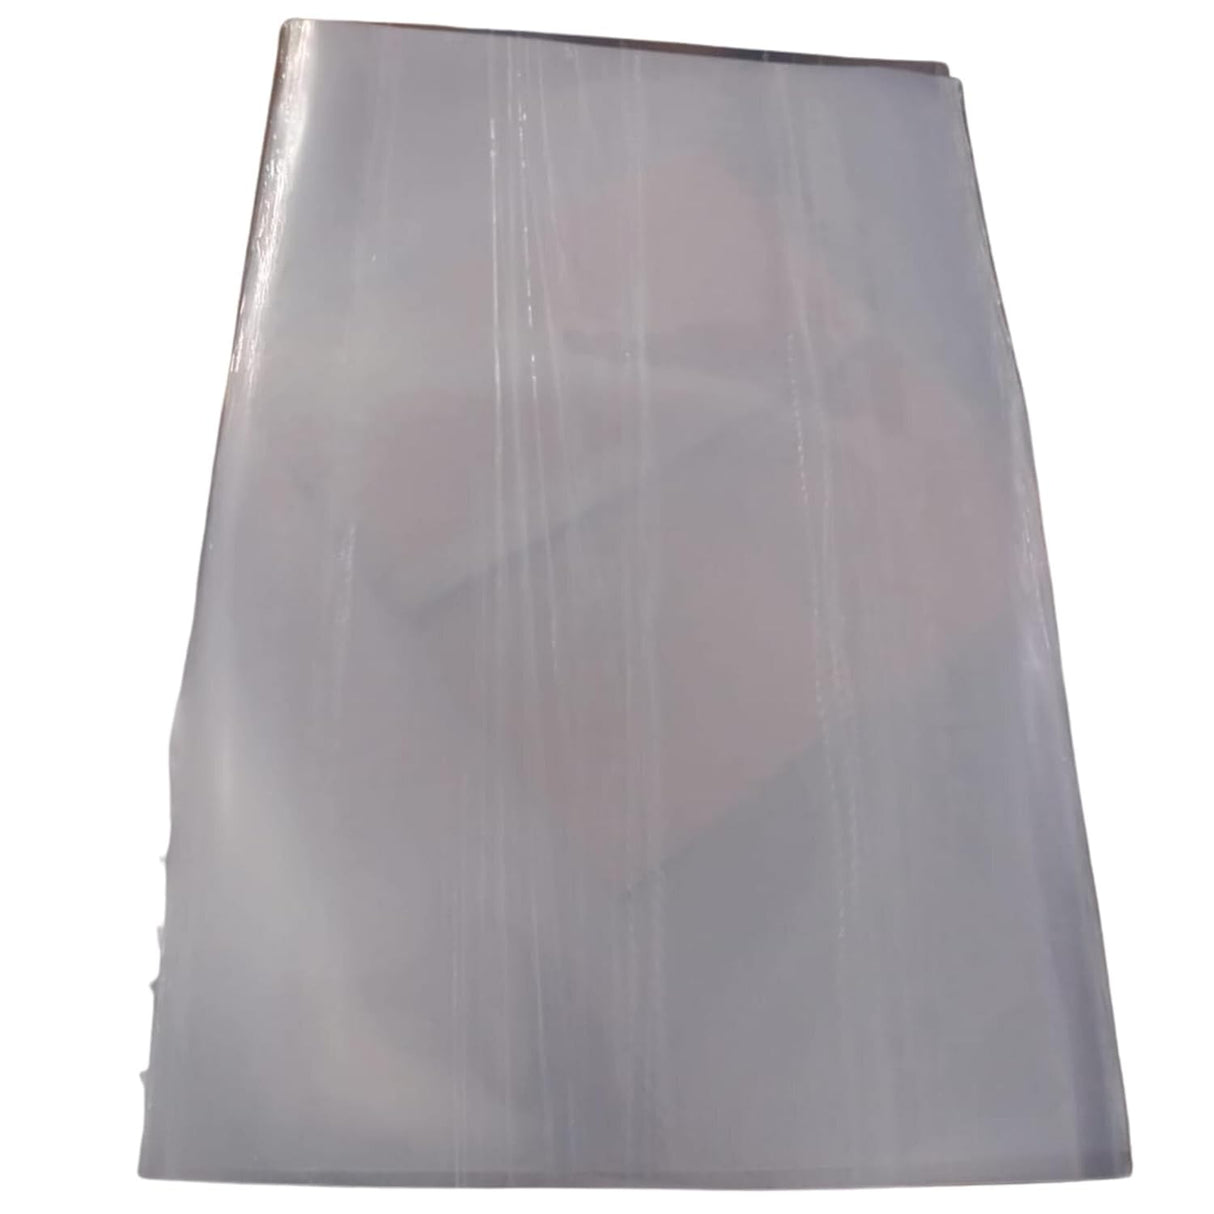 SINGHAL 70x46 Cm Clear PP Plain Transparent Sheet 350 Micron Pack of 100 with one side masking film for surface protection of the sheet